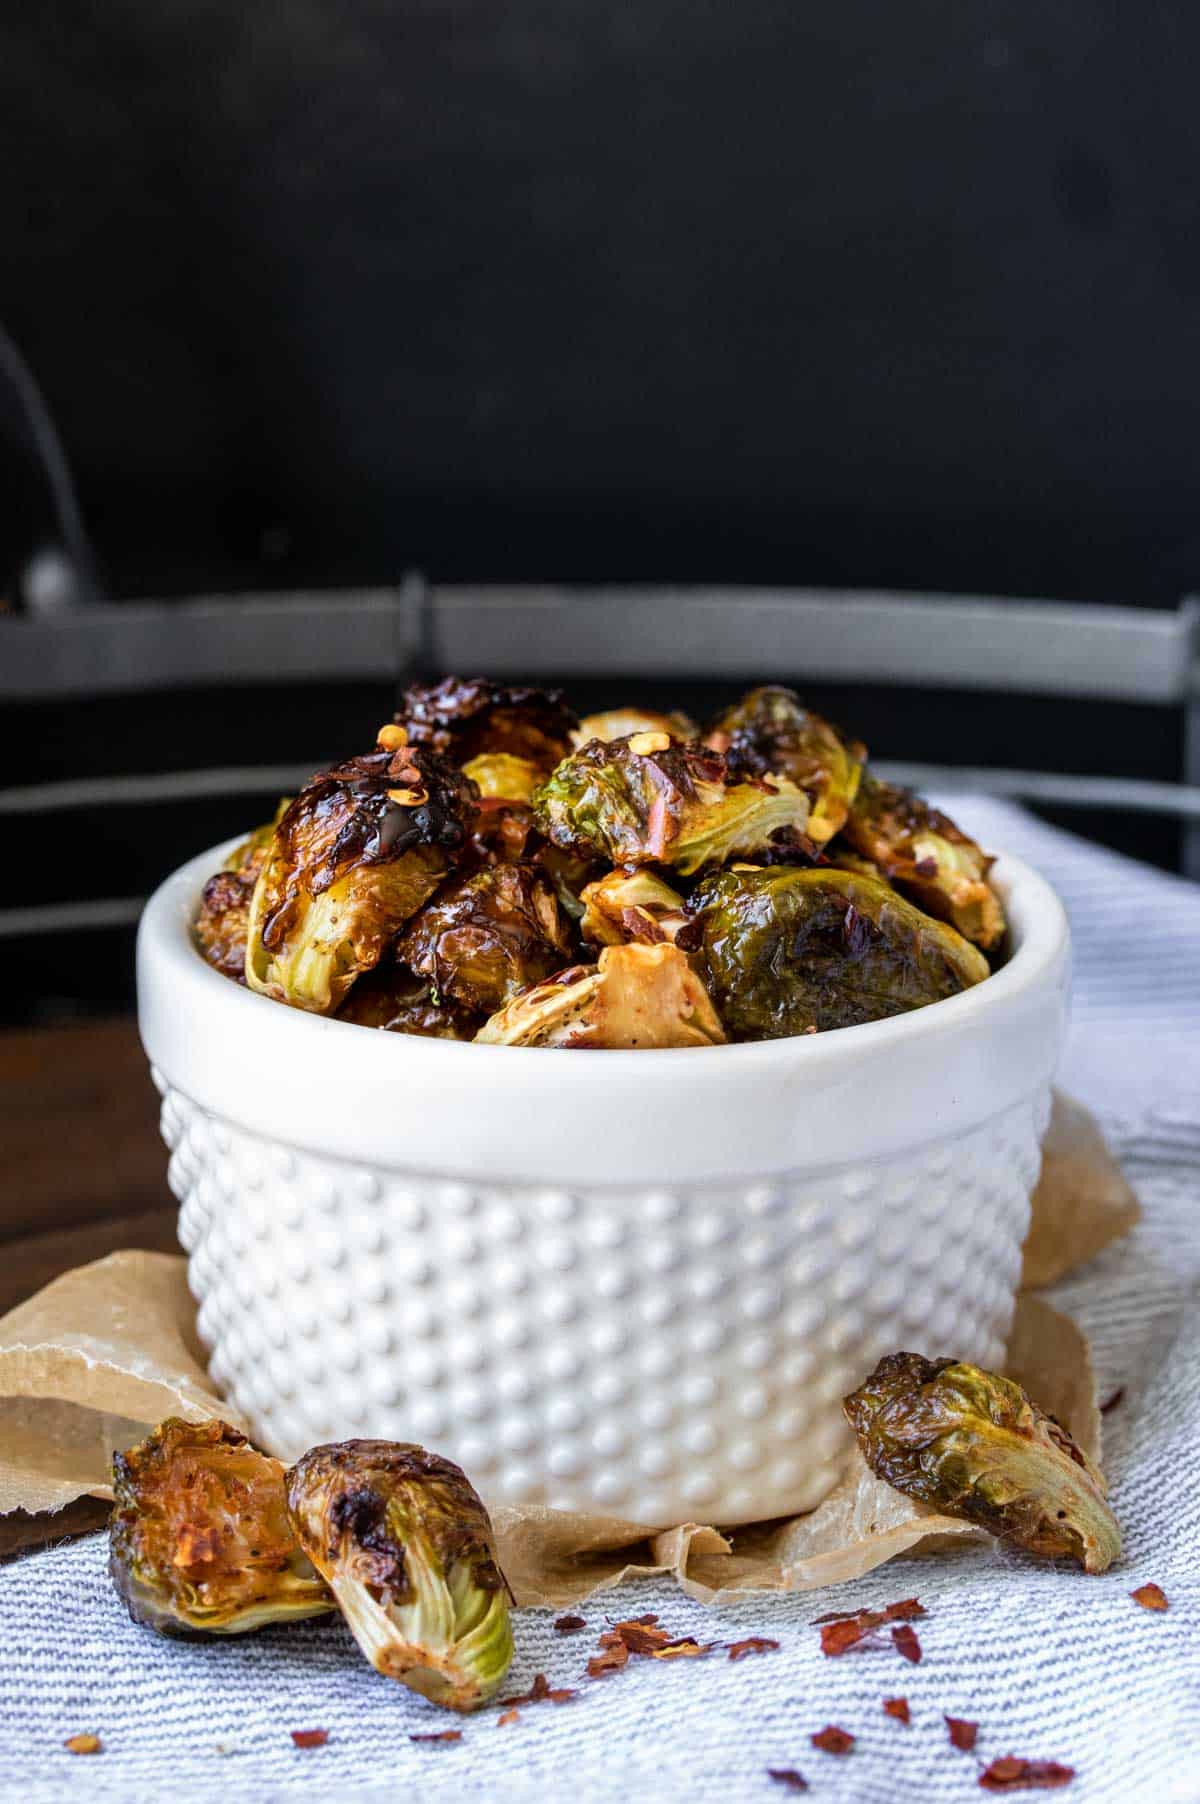 Brussels sprouts that have been roasted and browned in a white textured bowl sitting on parchment paper and a striped towel.